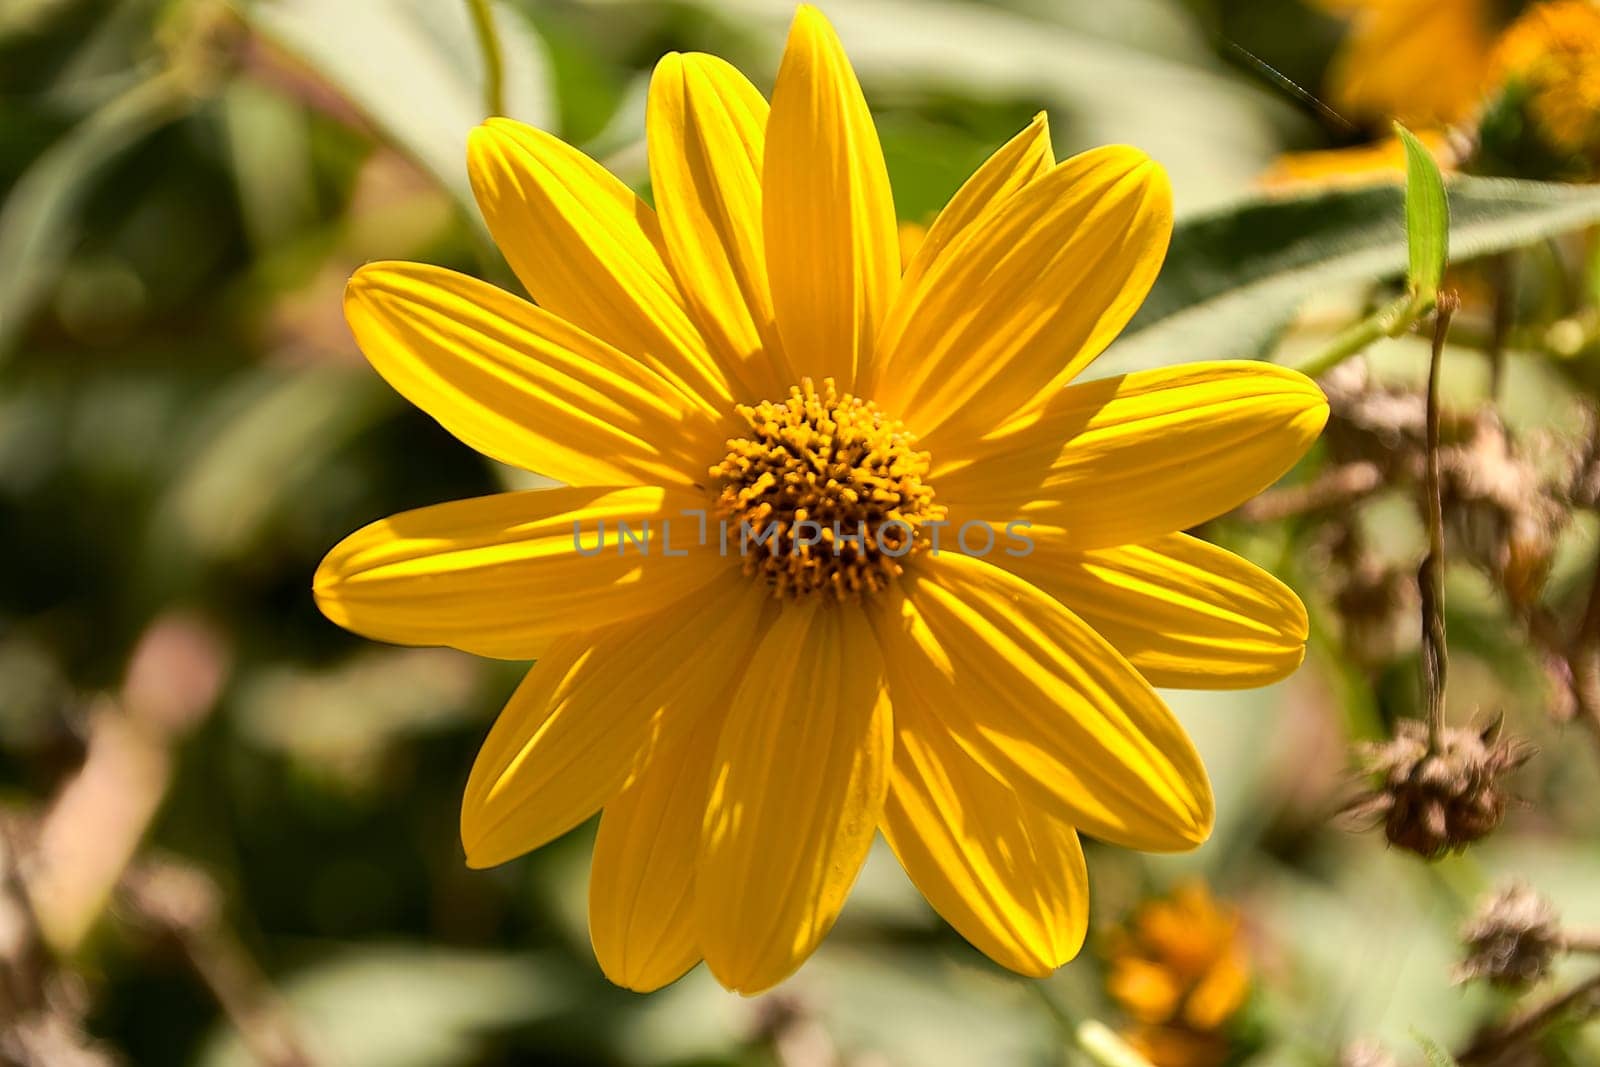 A yellow daisies. Dimorphotheca sinuata. Macro and detail photo, background out of focus and green.